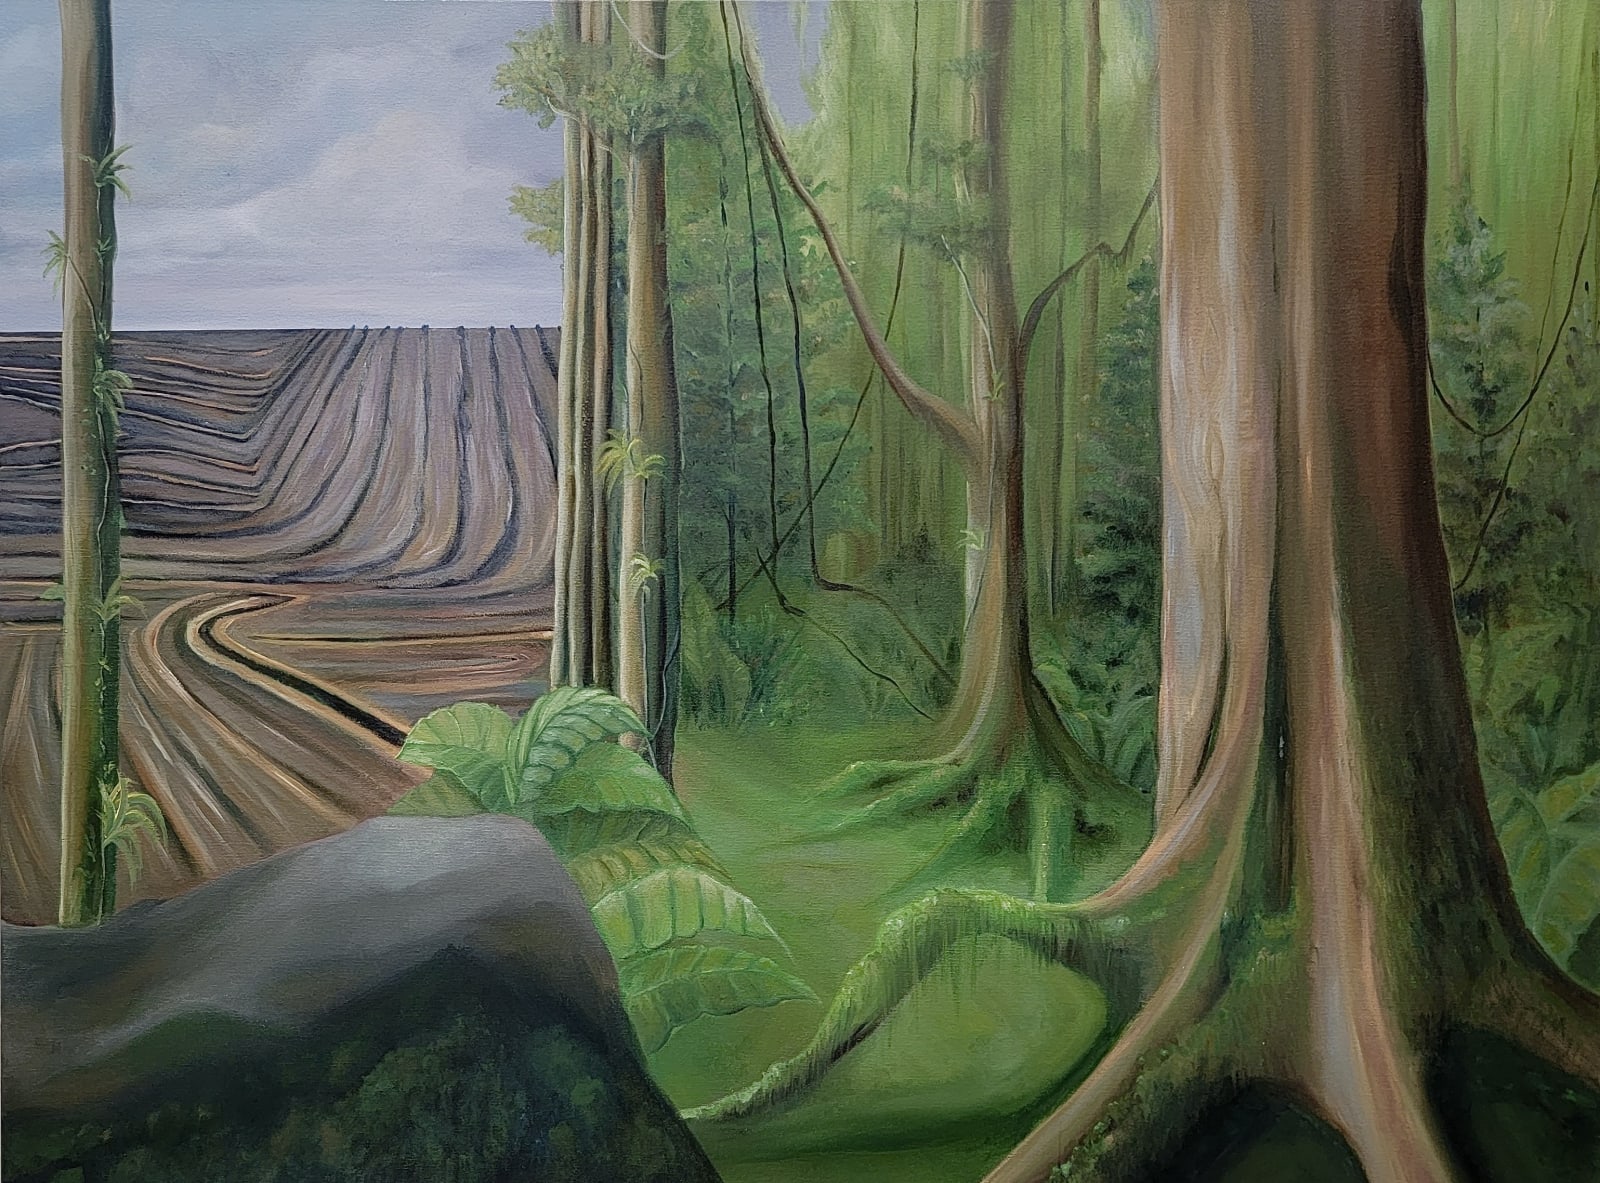 College 1st Place $500 RYLEE EWERT (BAYLOR UNIVERSITY) THE FELLING OF A LEAFY SHELTER [86], 2021 Oil on canvas